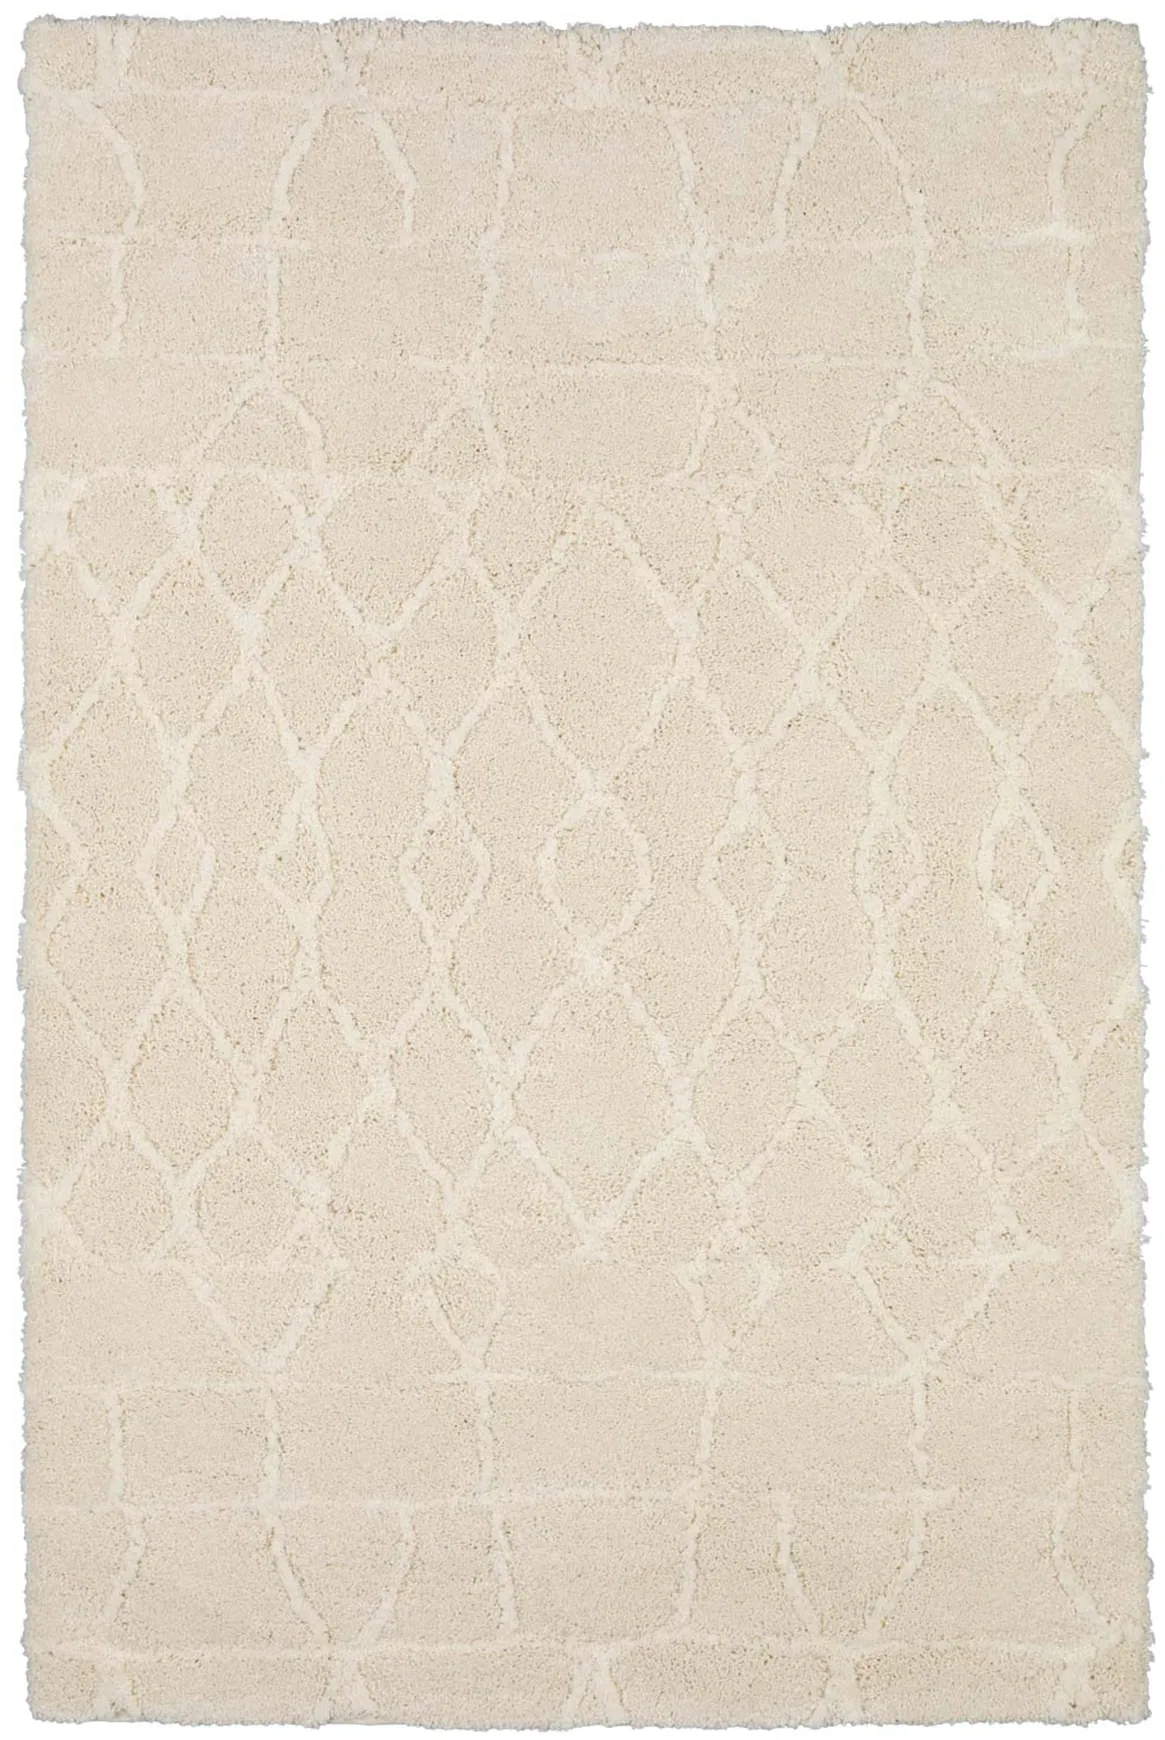 Marquee Ivory Area Rug 8'W x 10'L